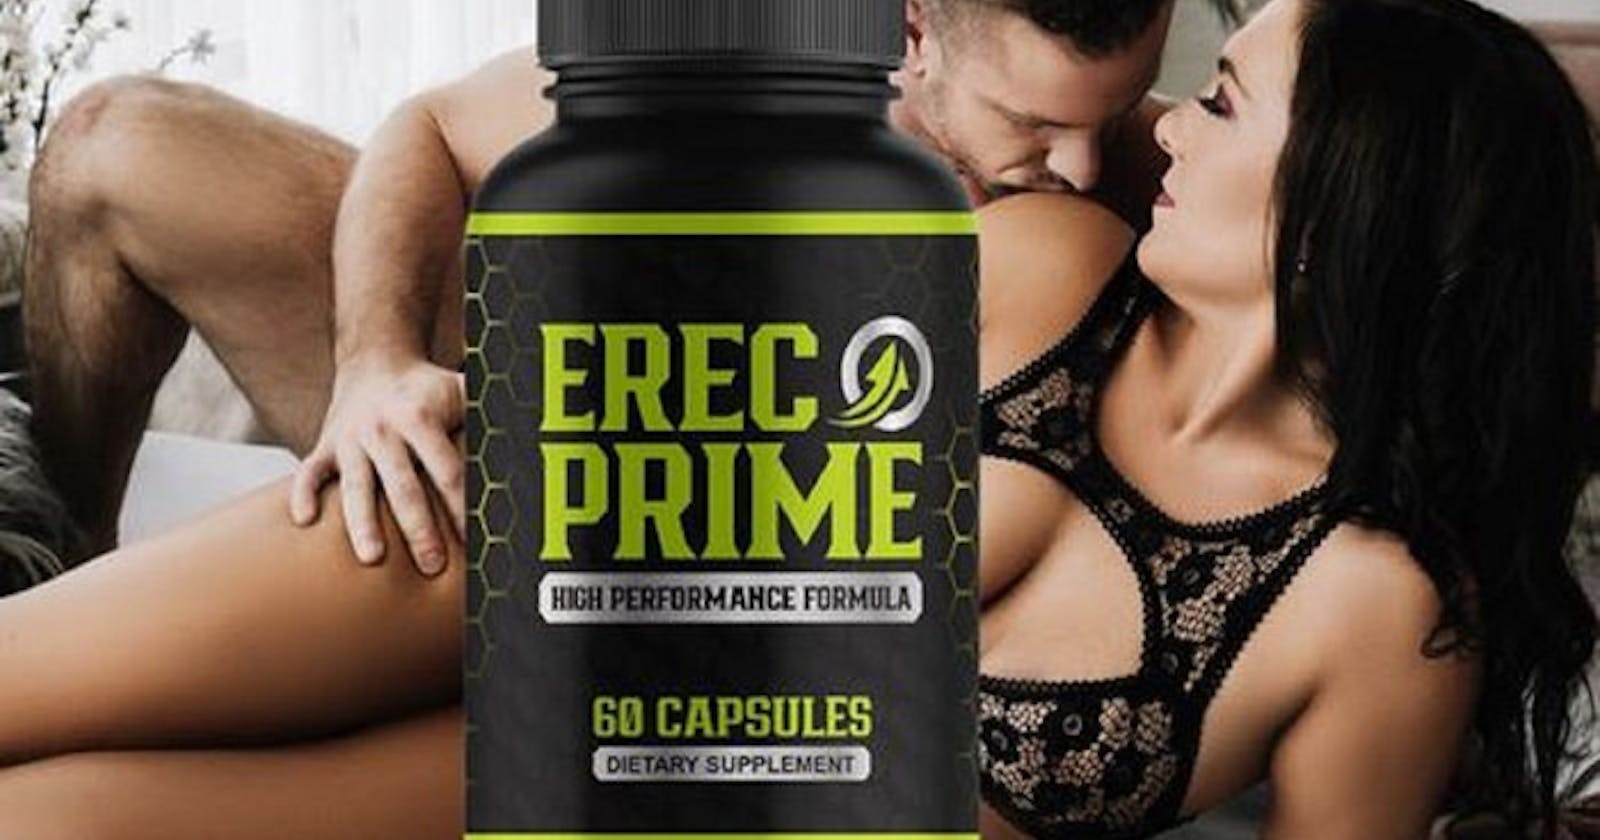 ErecPrime Reviews Scam: Does This Blood Flow Support Formula Help To Improve Strength And Stamina In Men?